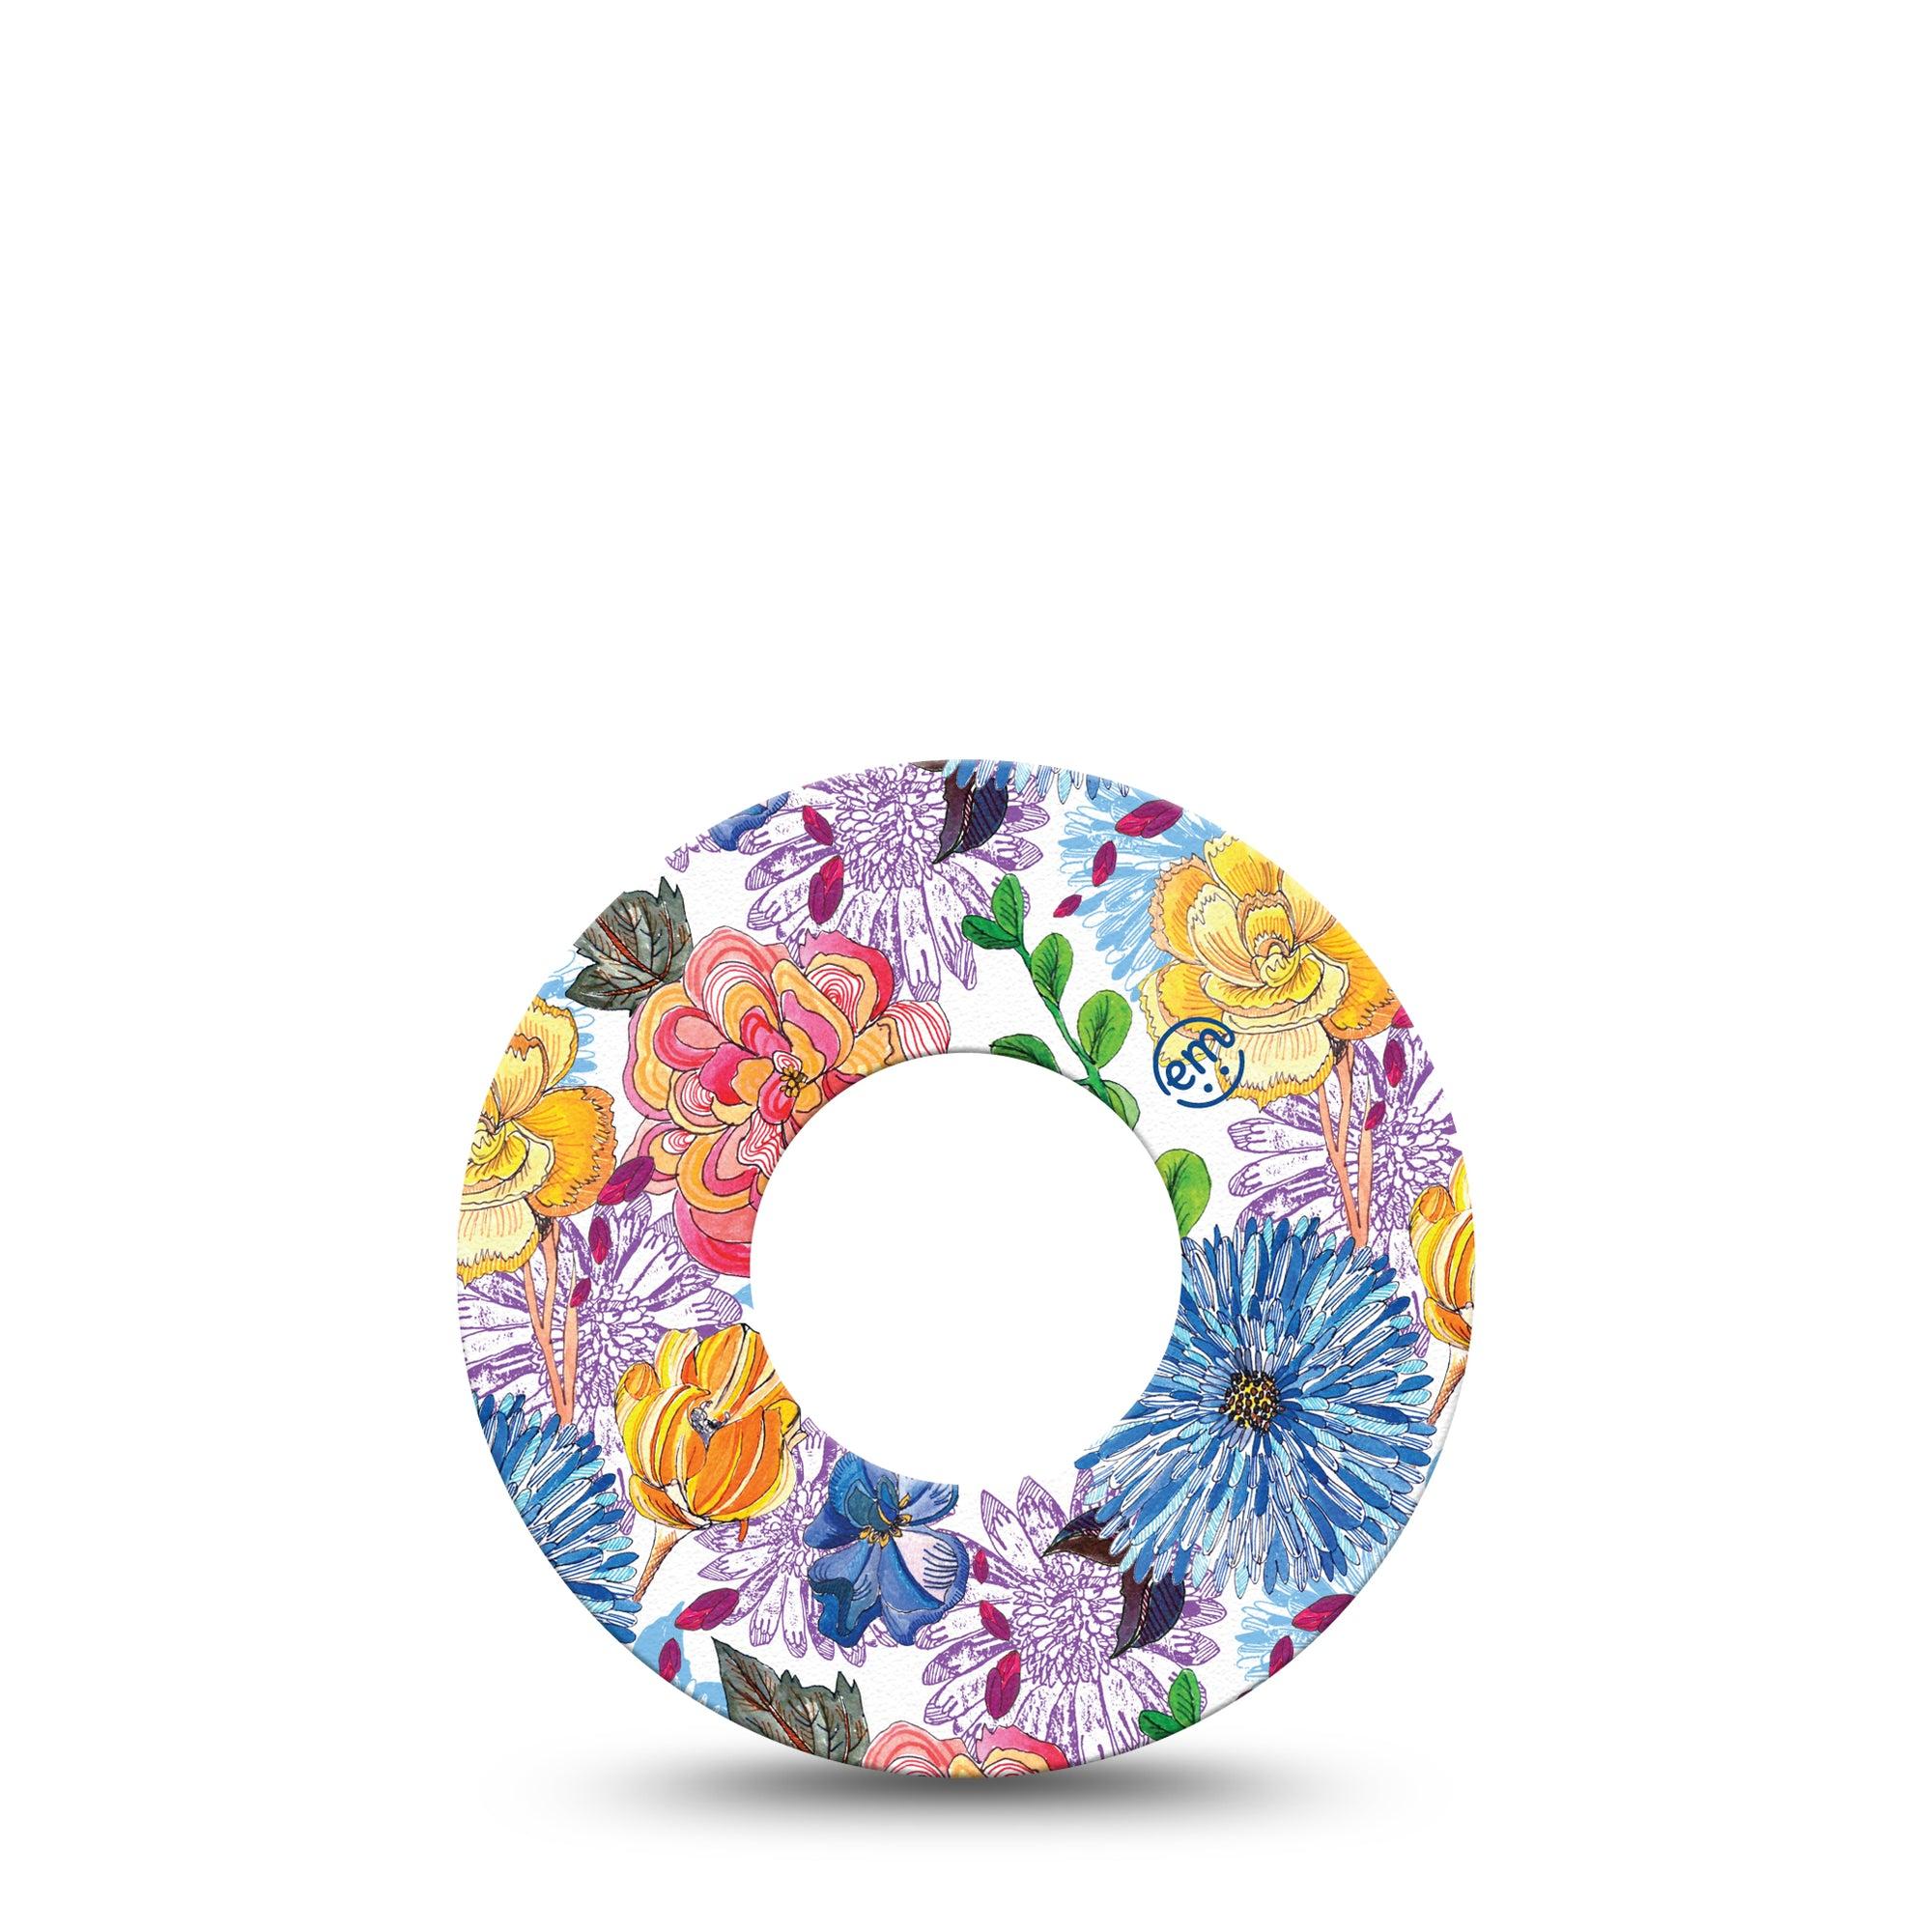 Stylised Floral Libre 2 Tape, Single, Garden Blooms Inspired, CGM Overlay Patch Design